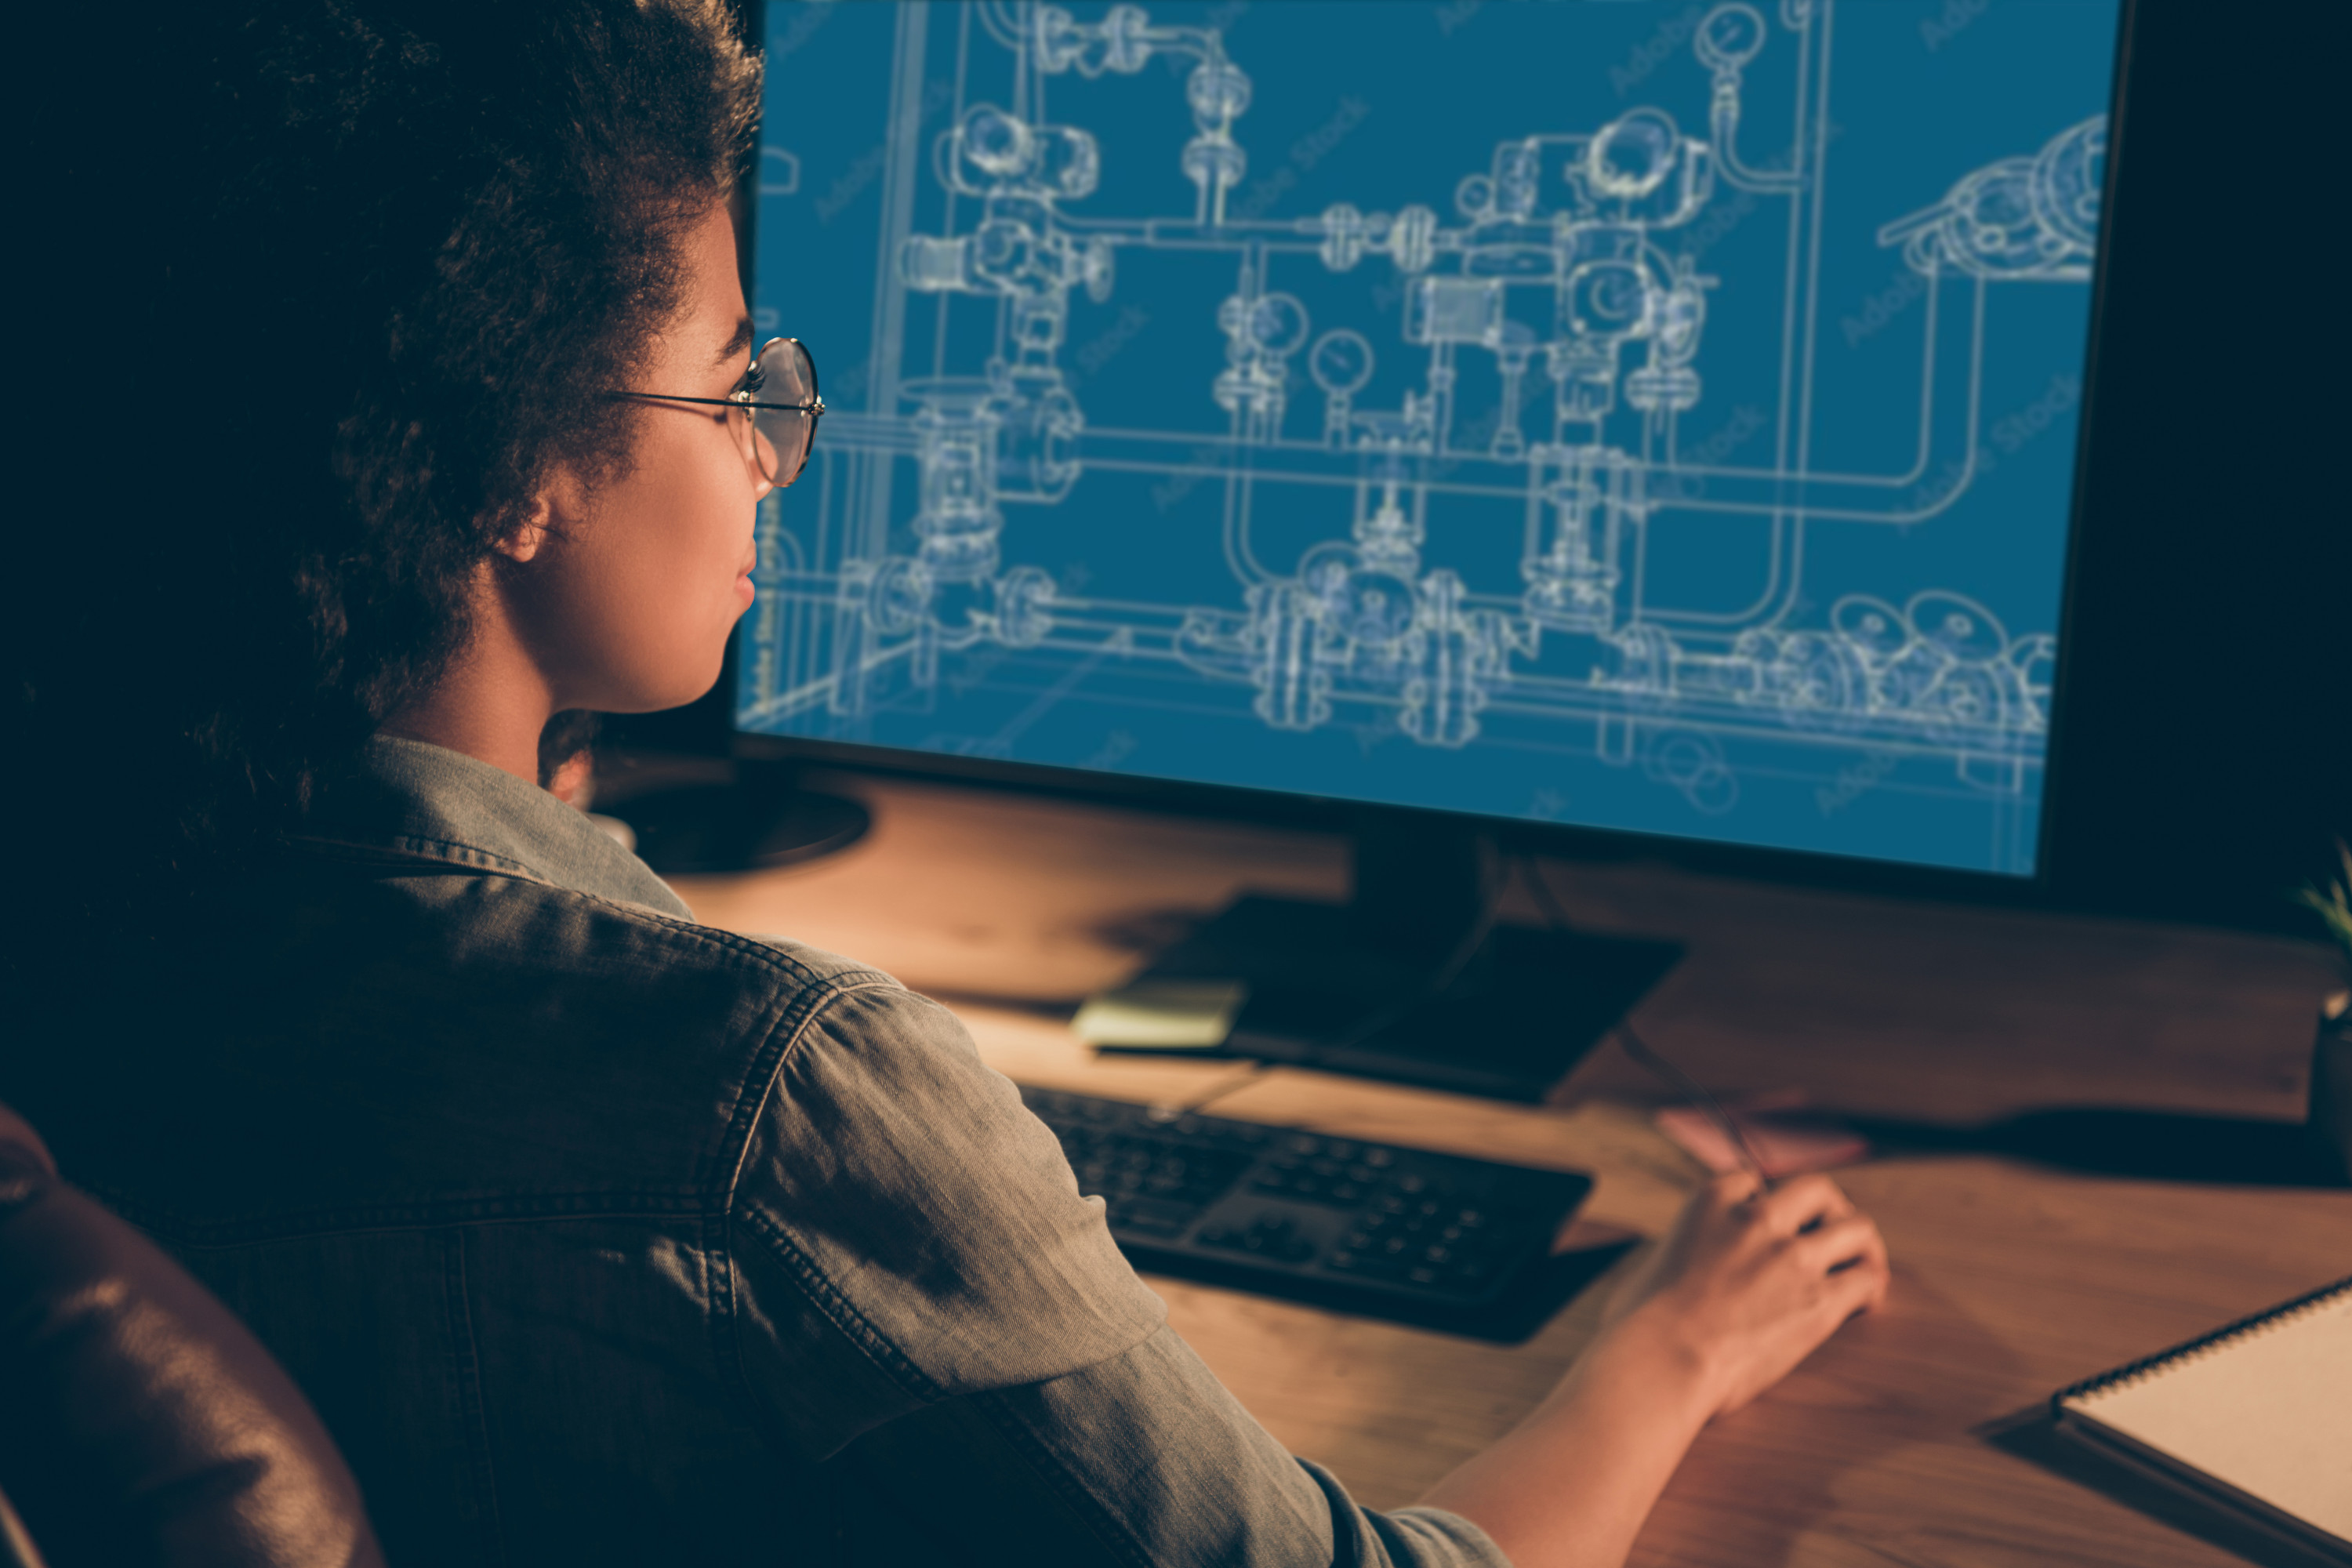 A woman sites at a computer with the blueprints for a series of pipes on the screen